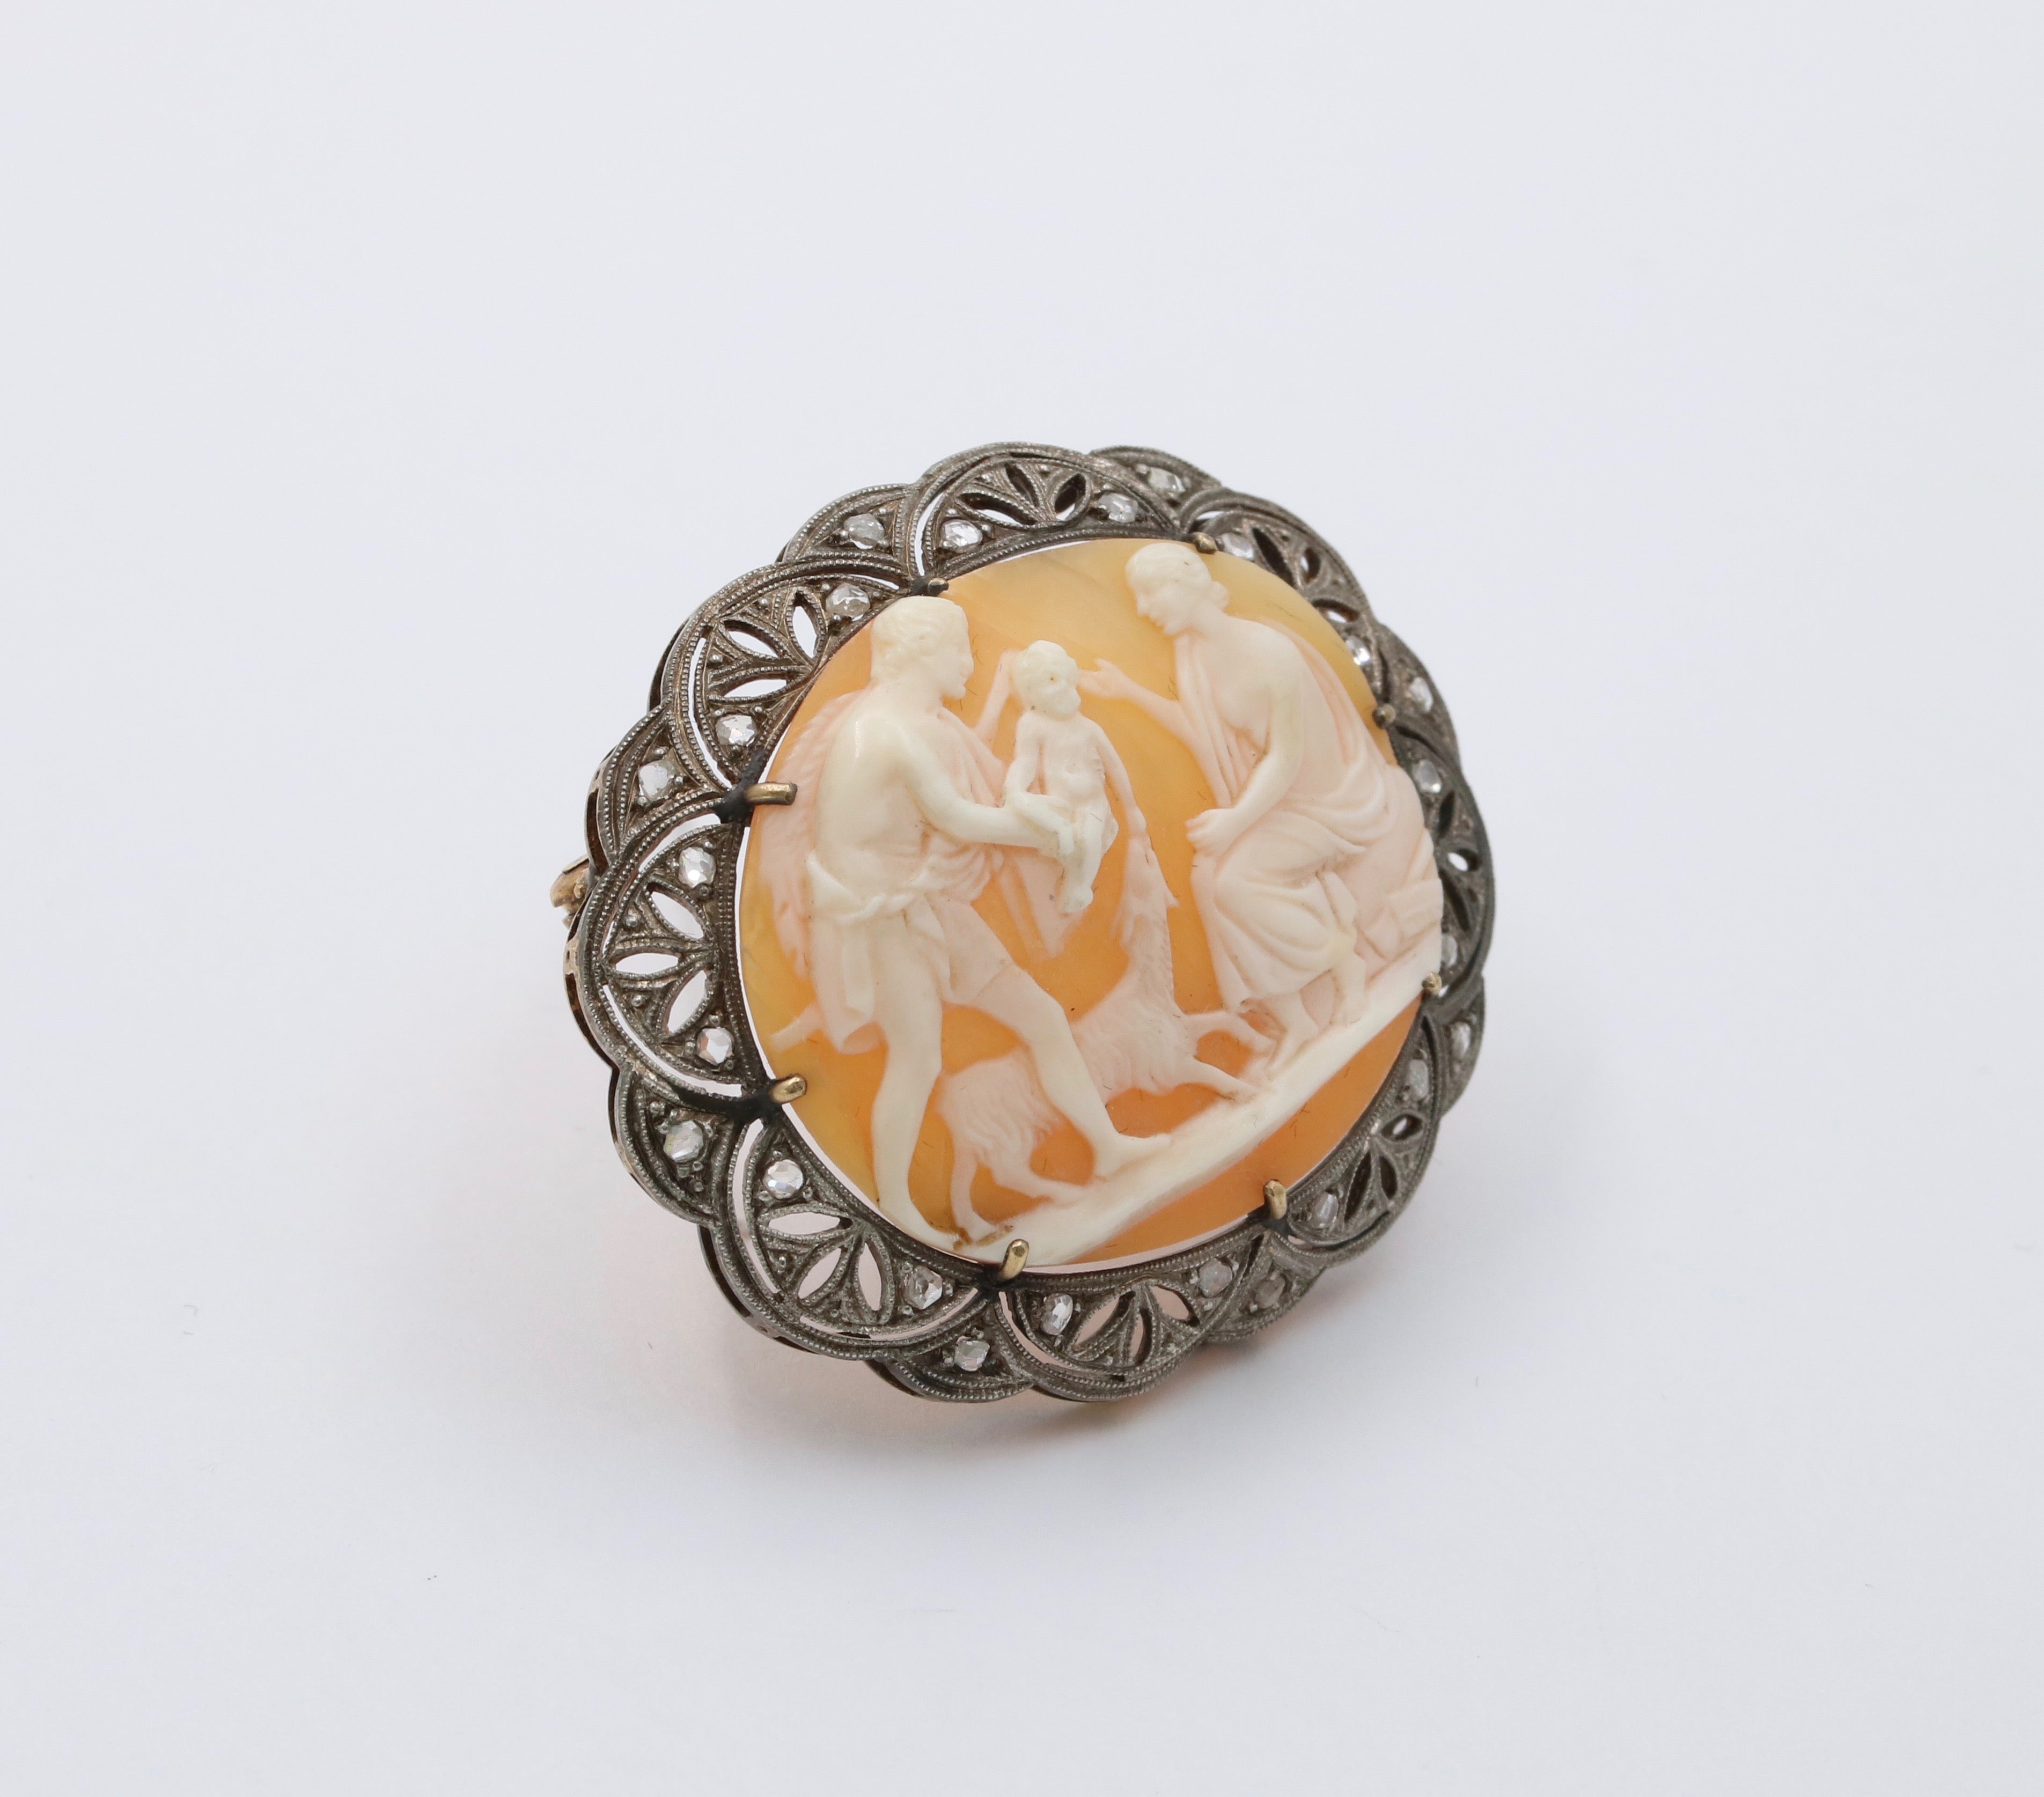 Antique 18K Gold, Silver, and Diamond Cameo Brooch, Pin – Alpha